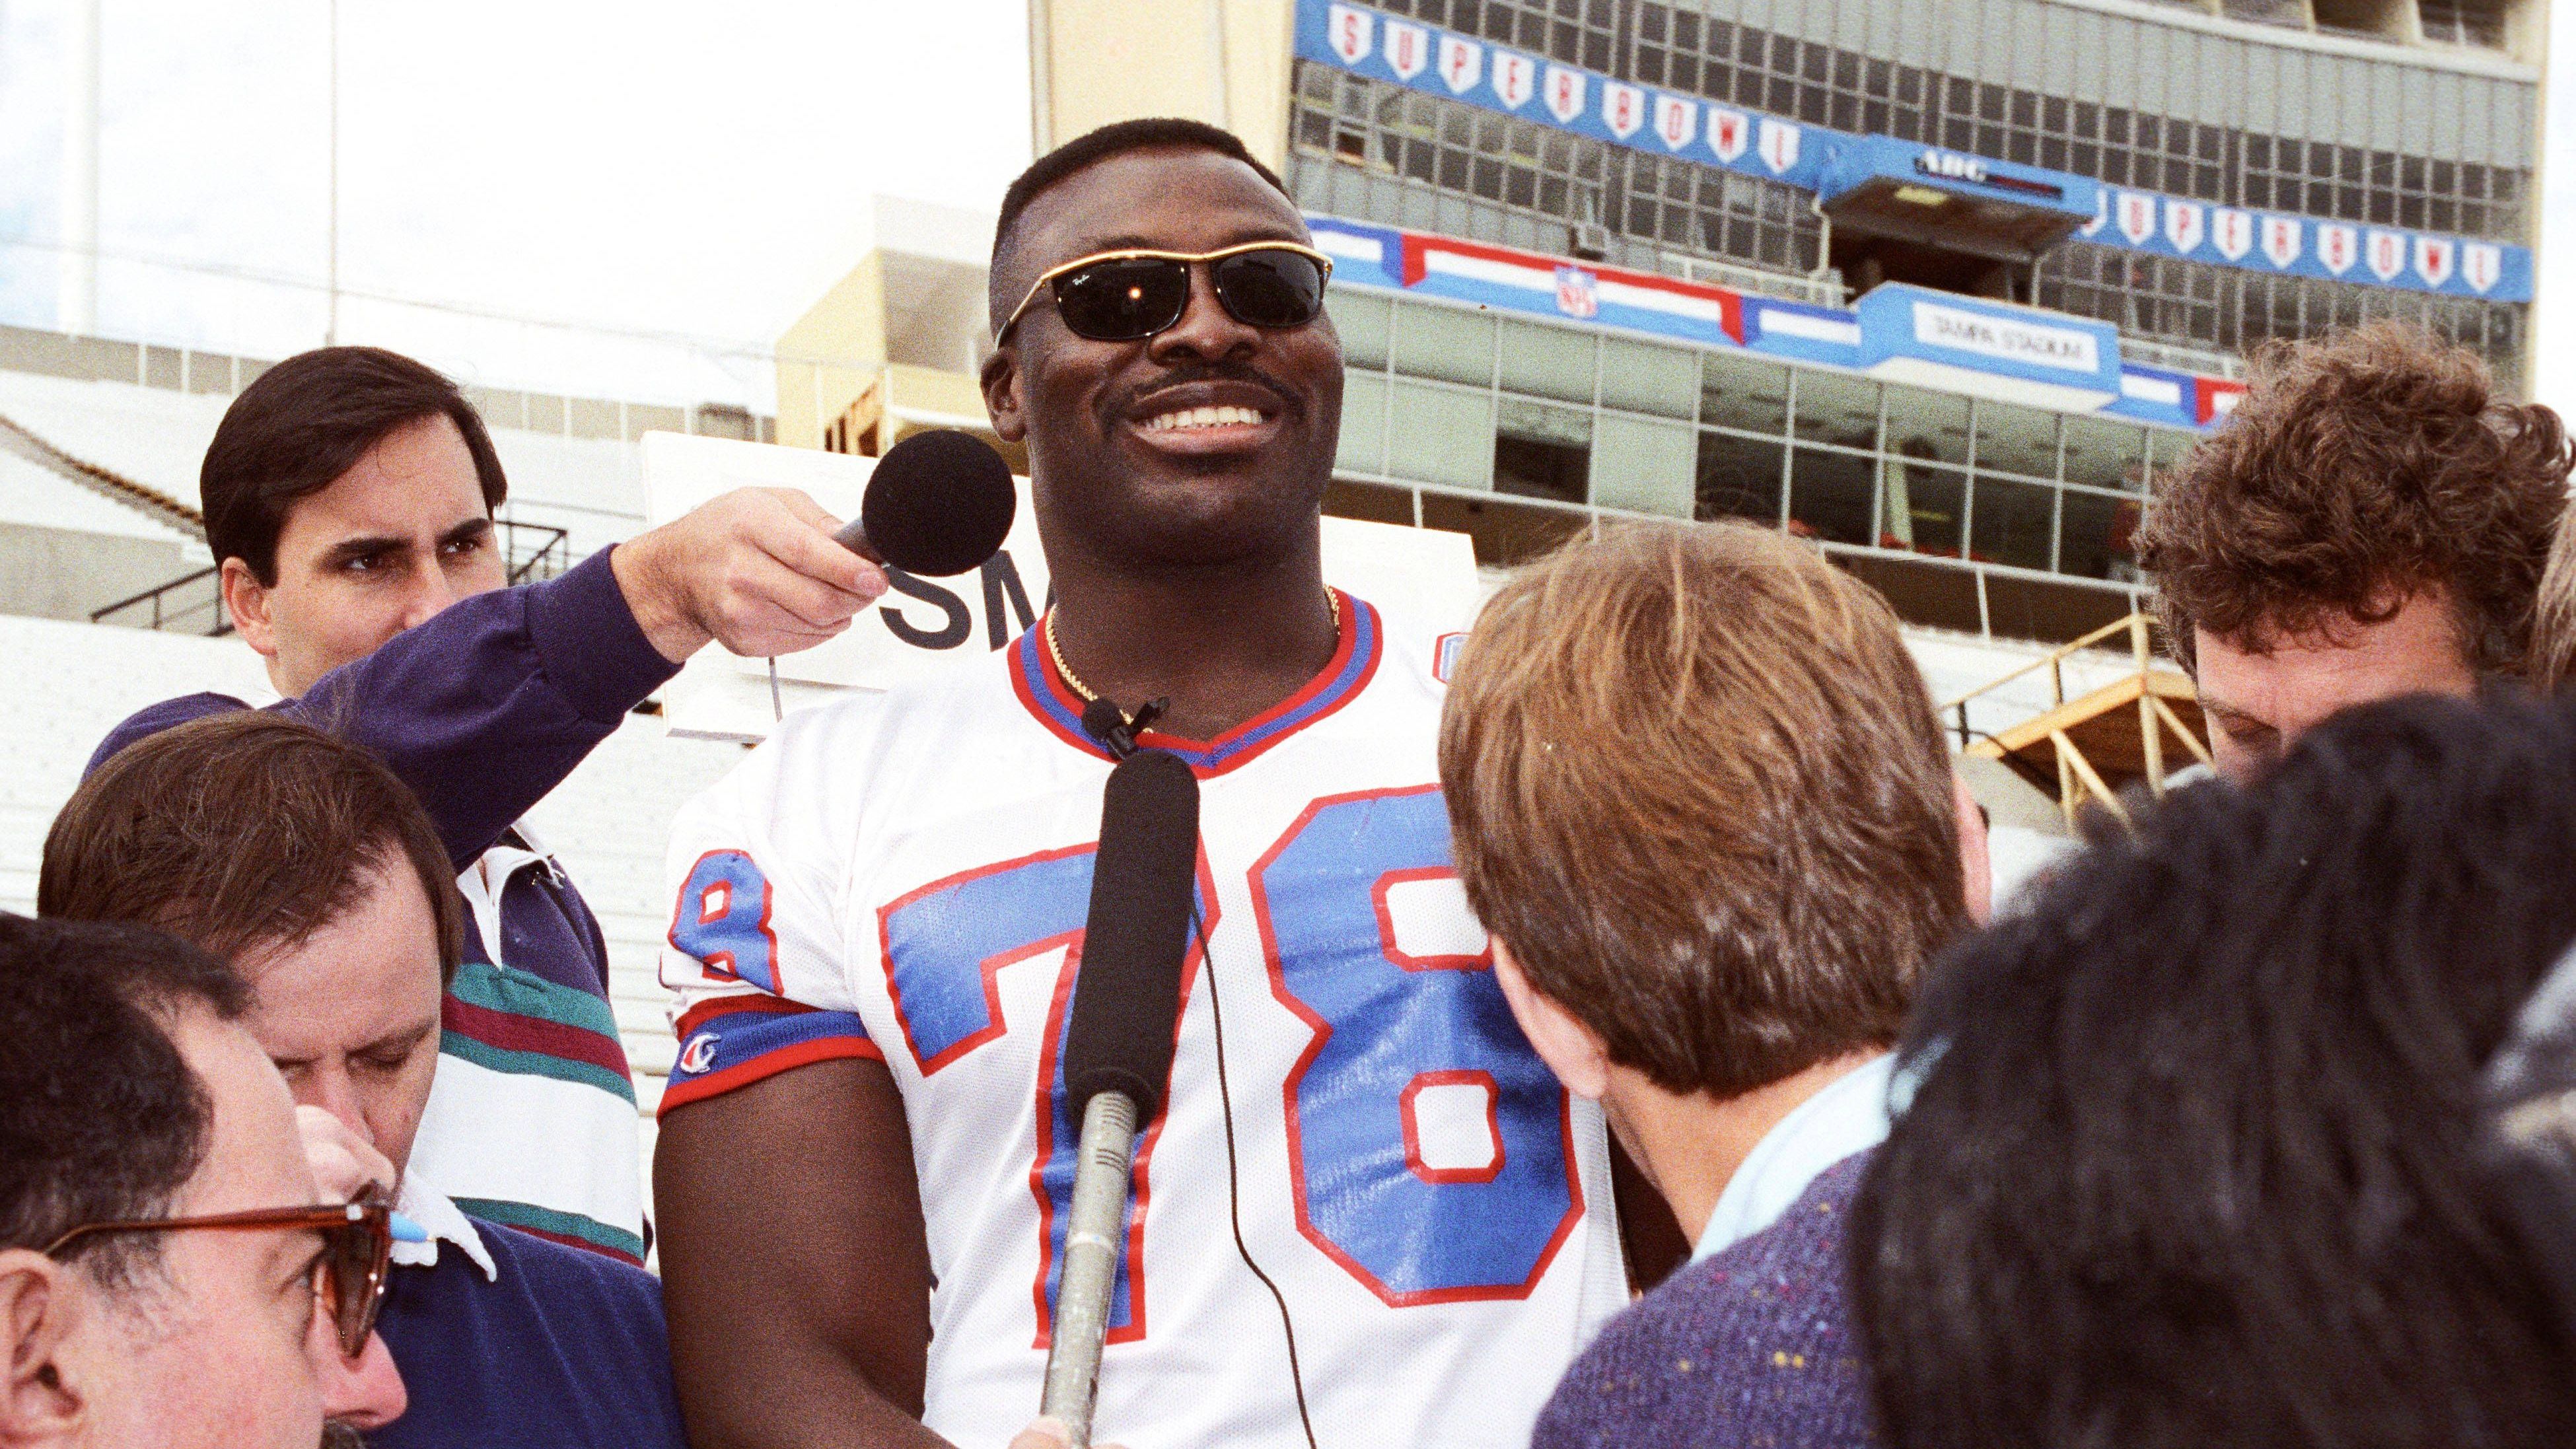 <strong>Bruce Smith - 1985</strong><br>Position: Defensive End<br>Draft-Team: Buffalo Bills<br>Erfolge: 11x Pro Bowl, 2x Defensive Player of the Year, Pro Football Hall of Fame<br>Karriereende: 2003